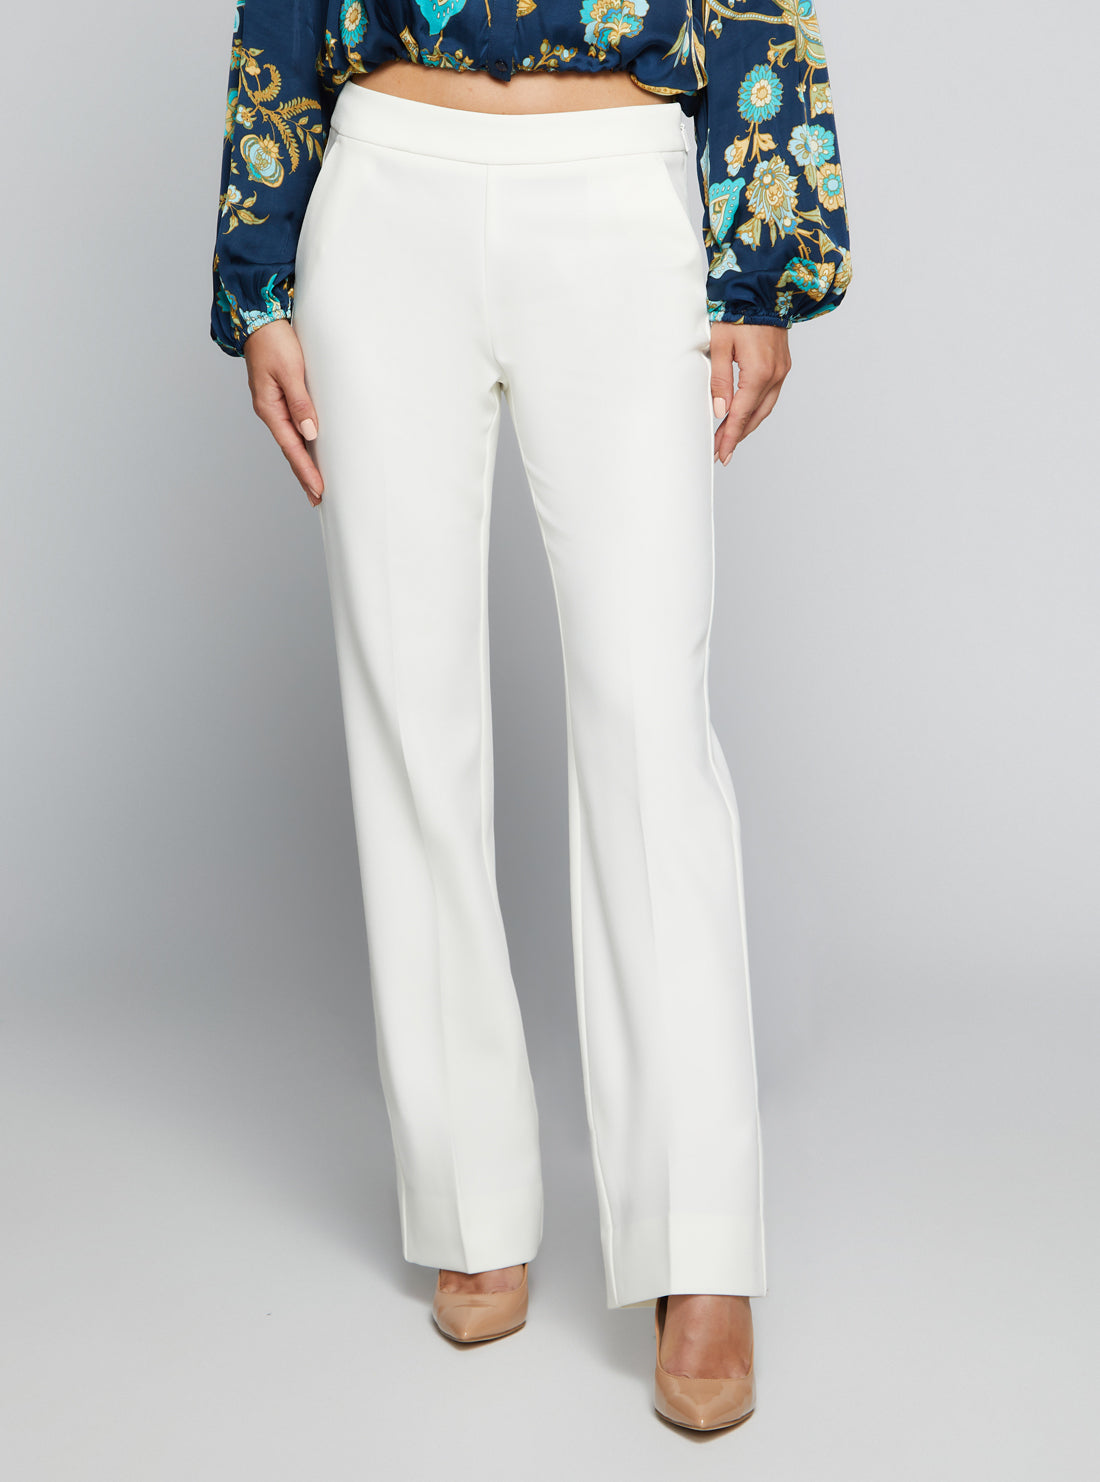 GUESS Women's Marciano White Sally Pants 1BGB329653Z Front View